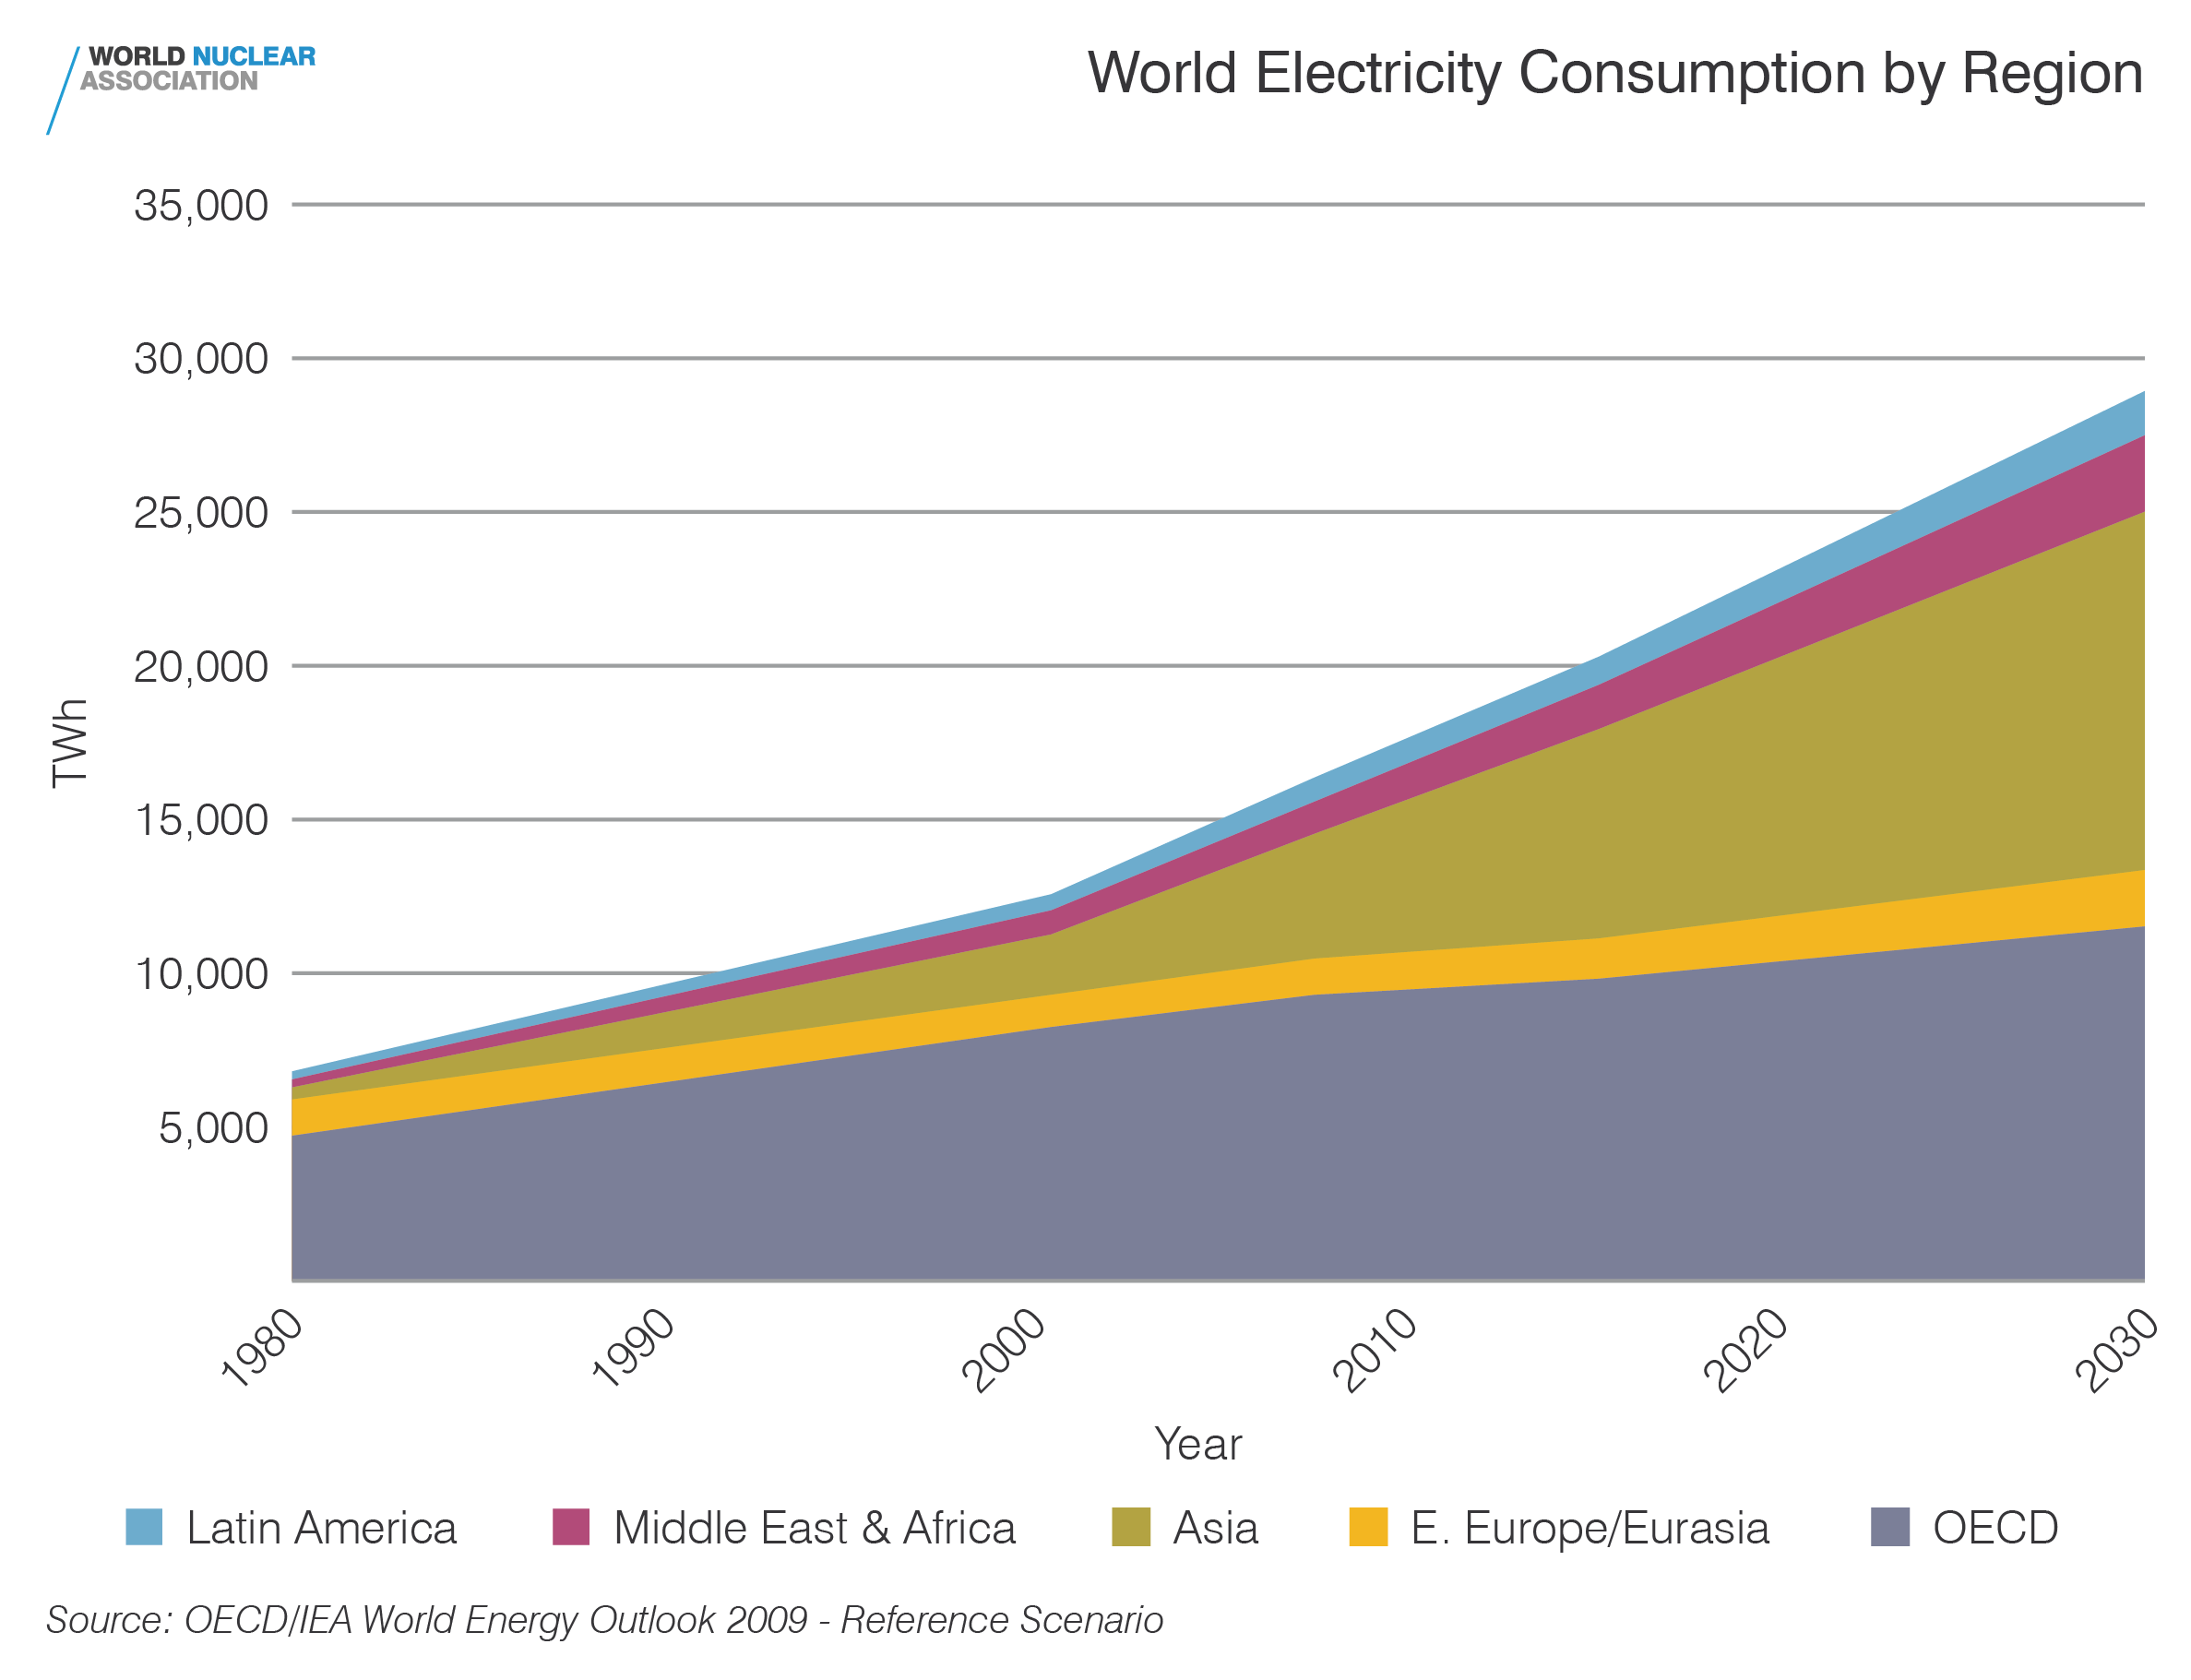 World electricity consumption